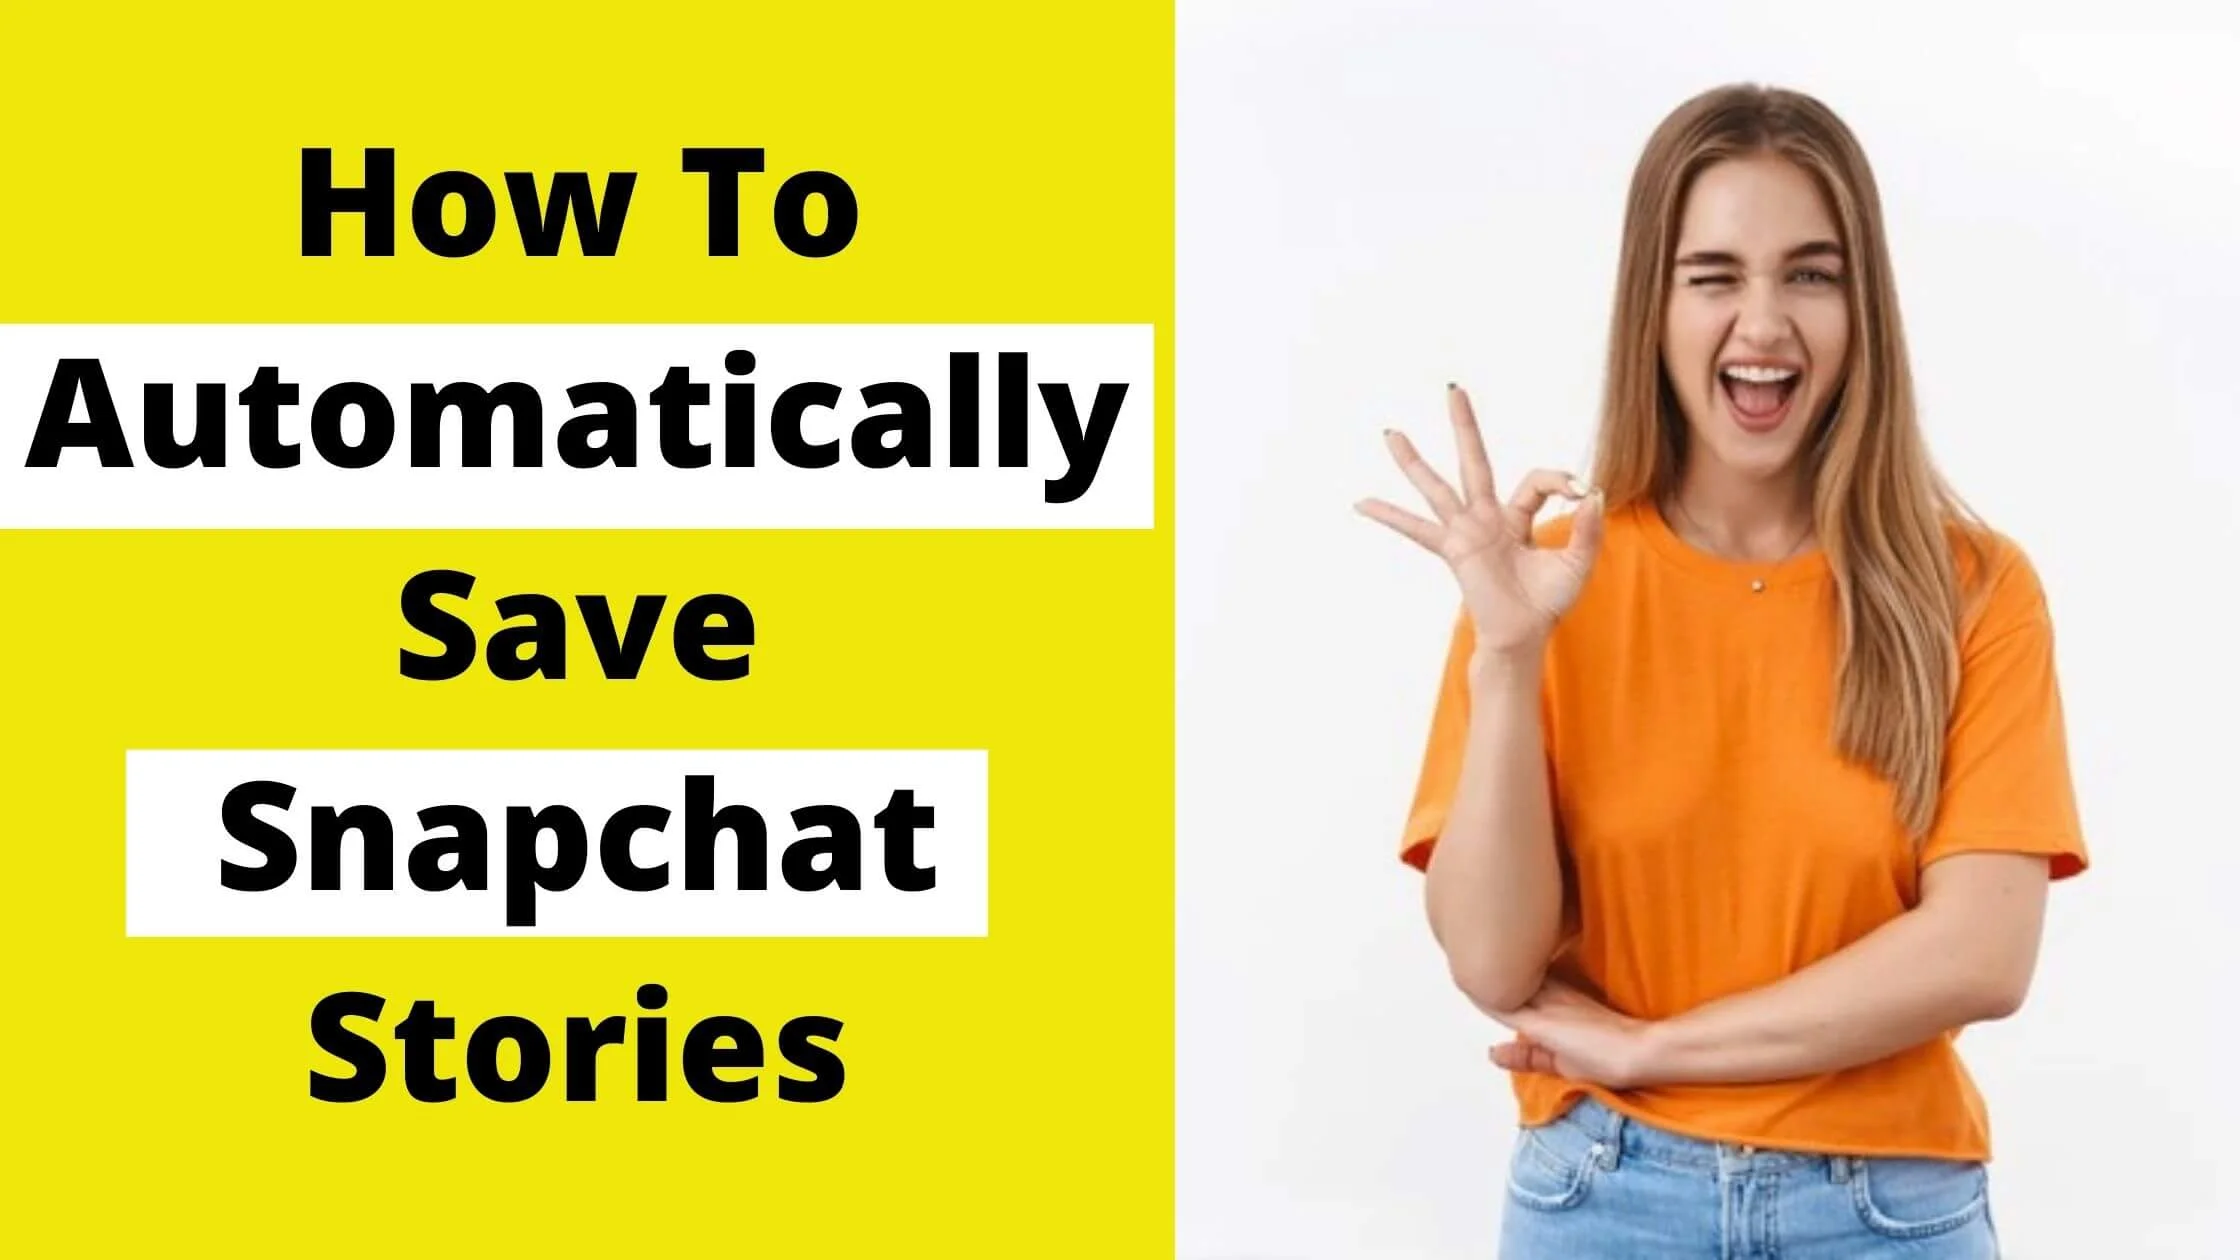 How To Automatically Save Snapchat Stories